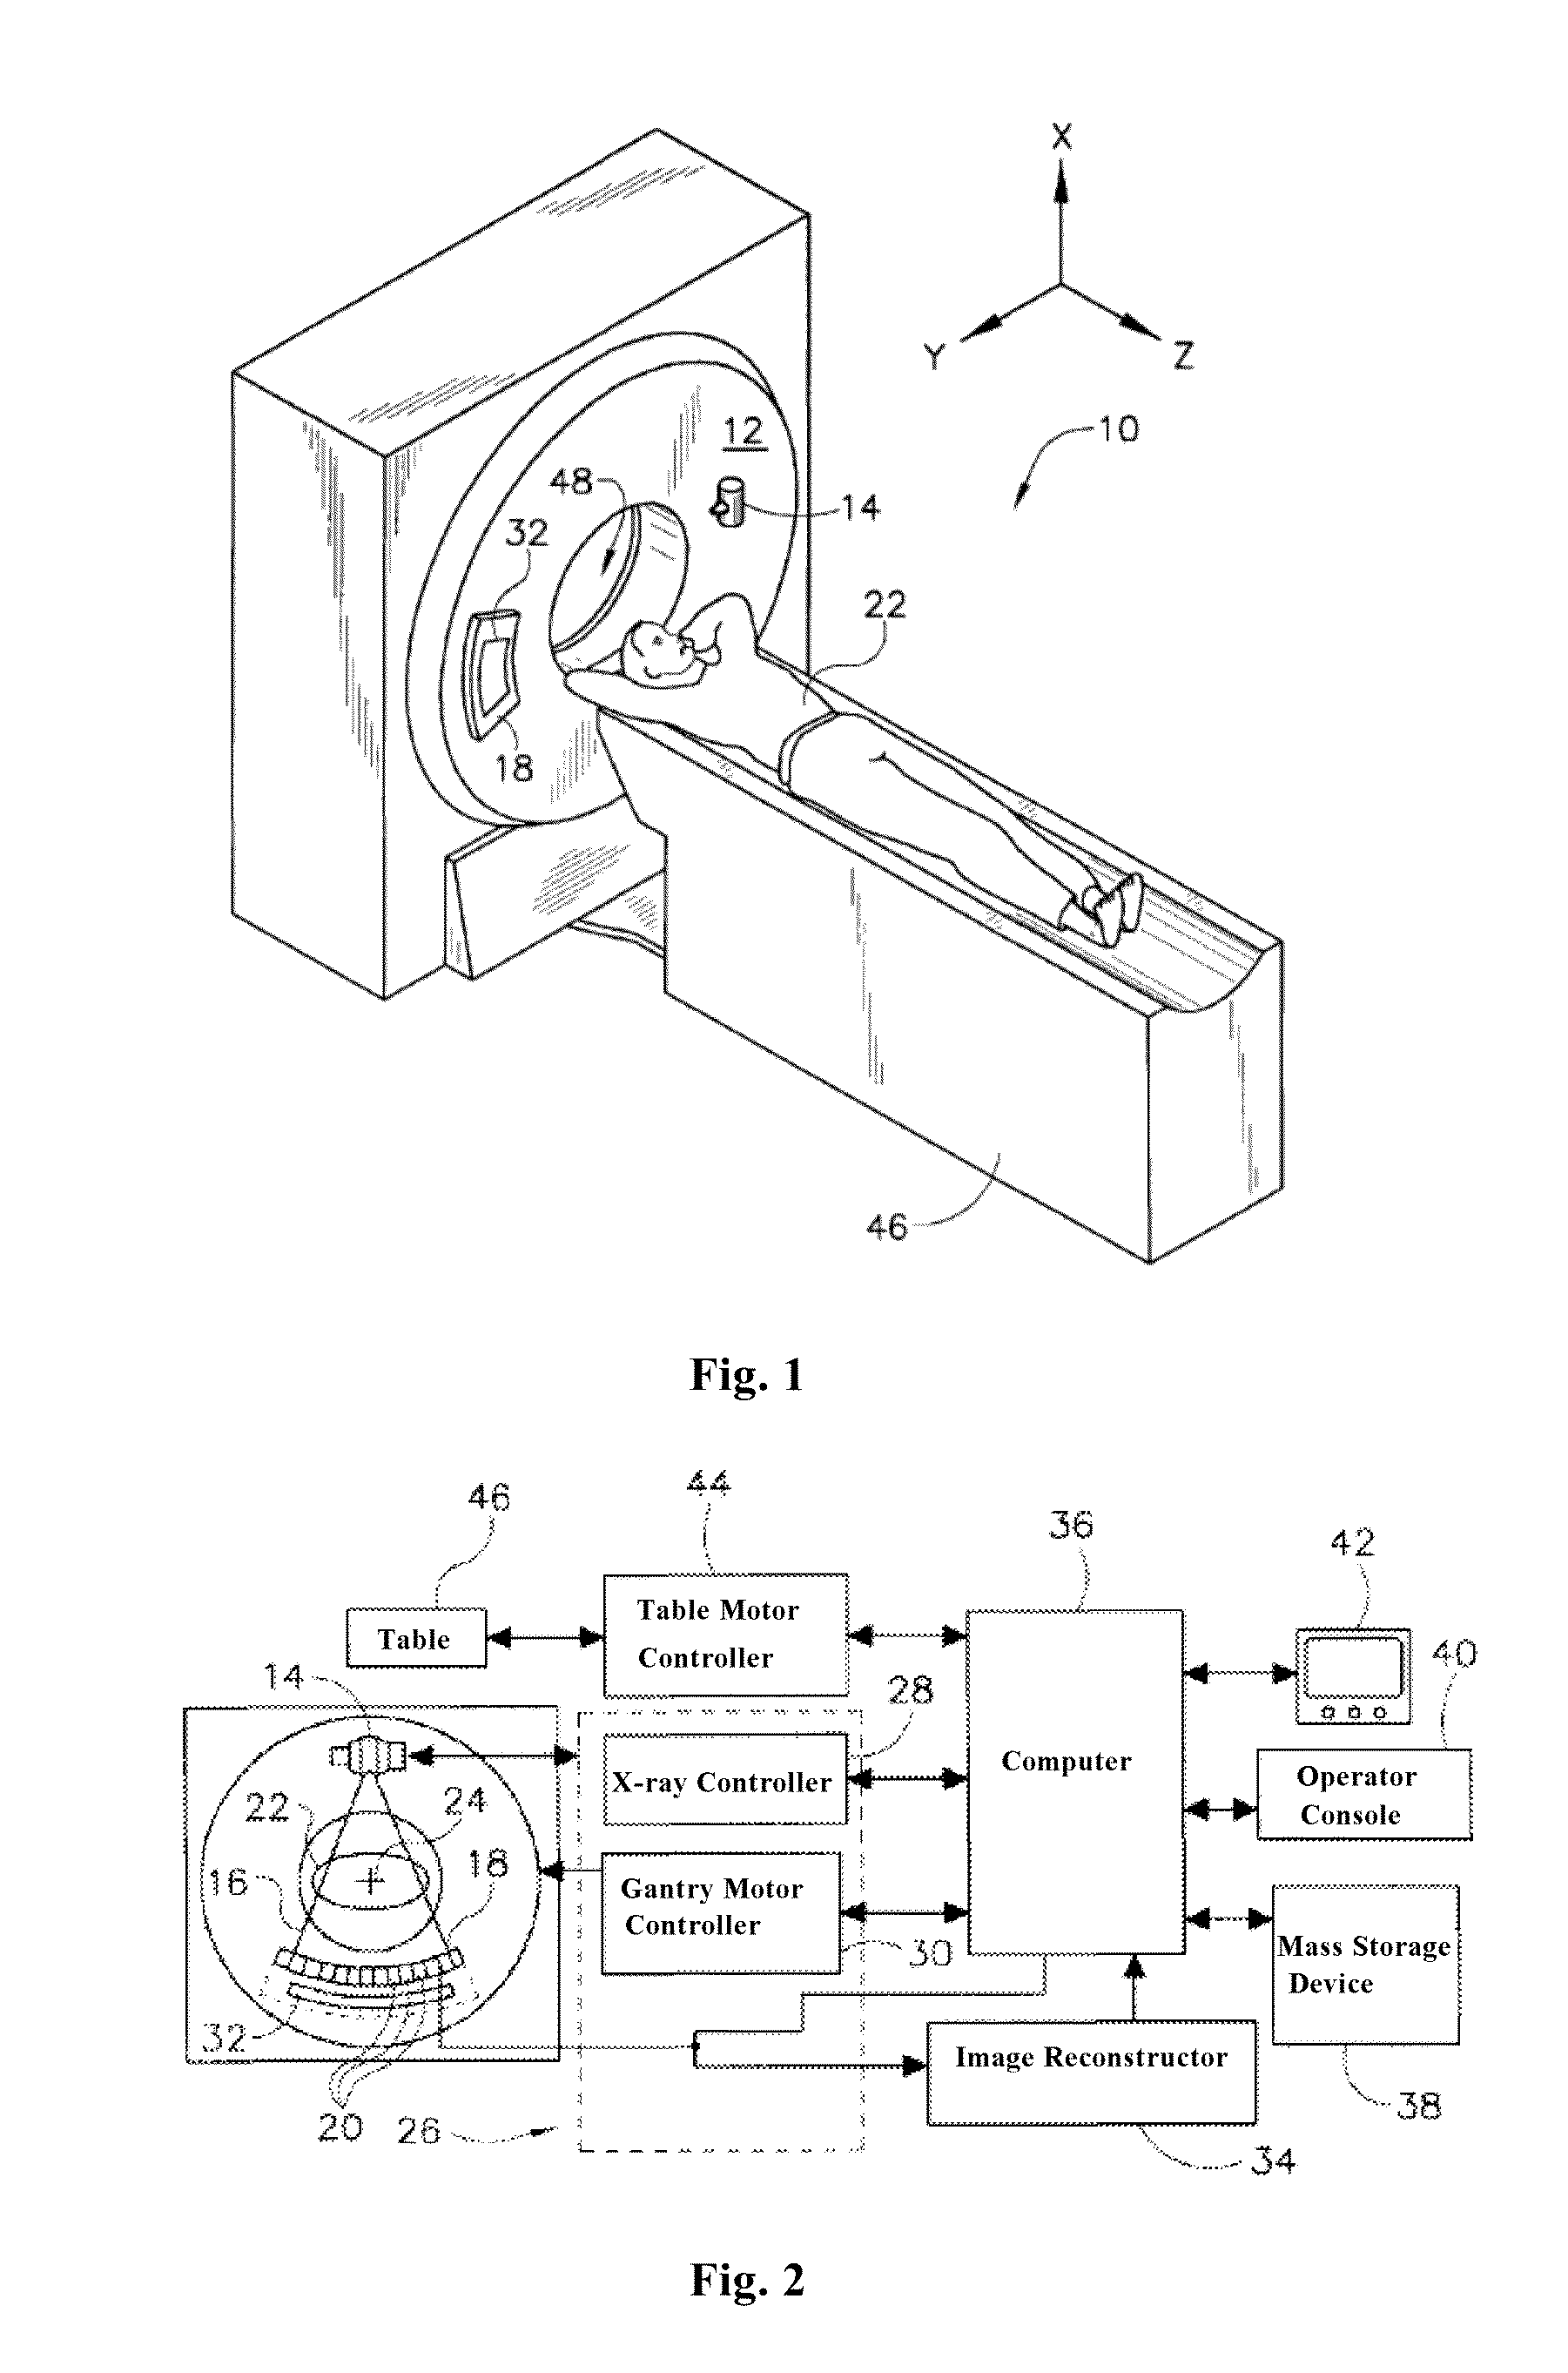 Method and apparatus for reducing artifacts in computed tomography image reconstruction